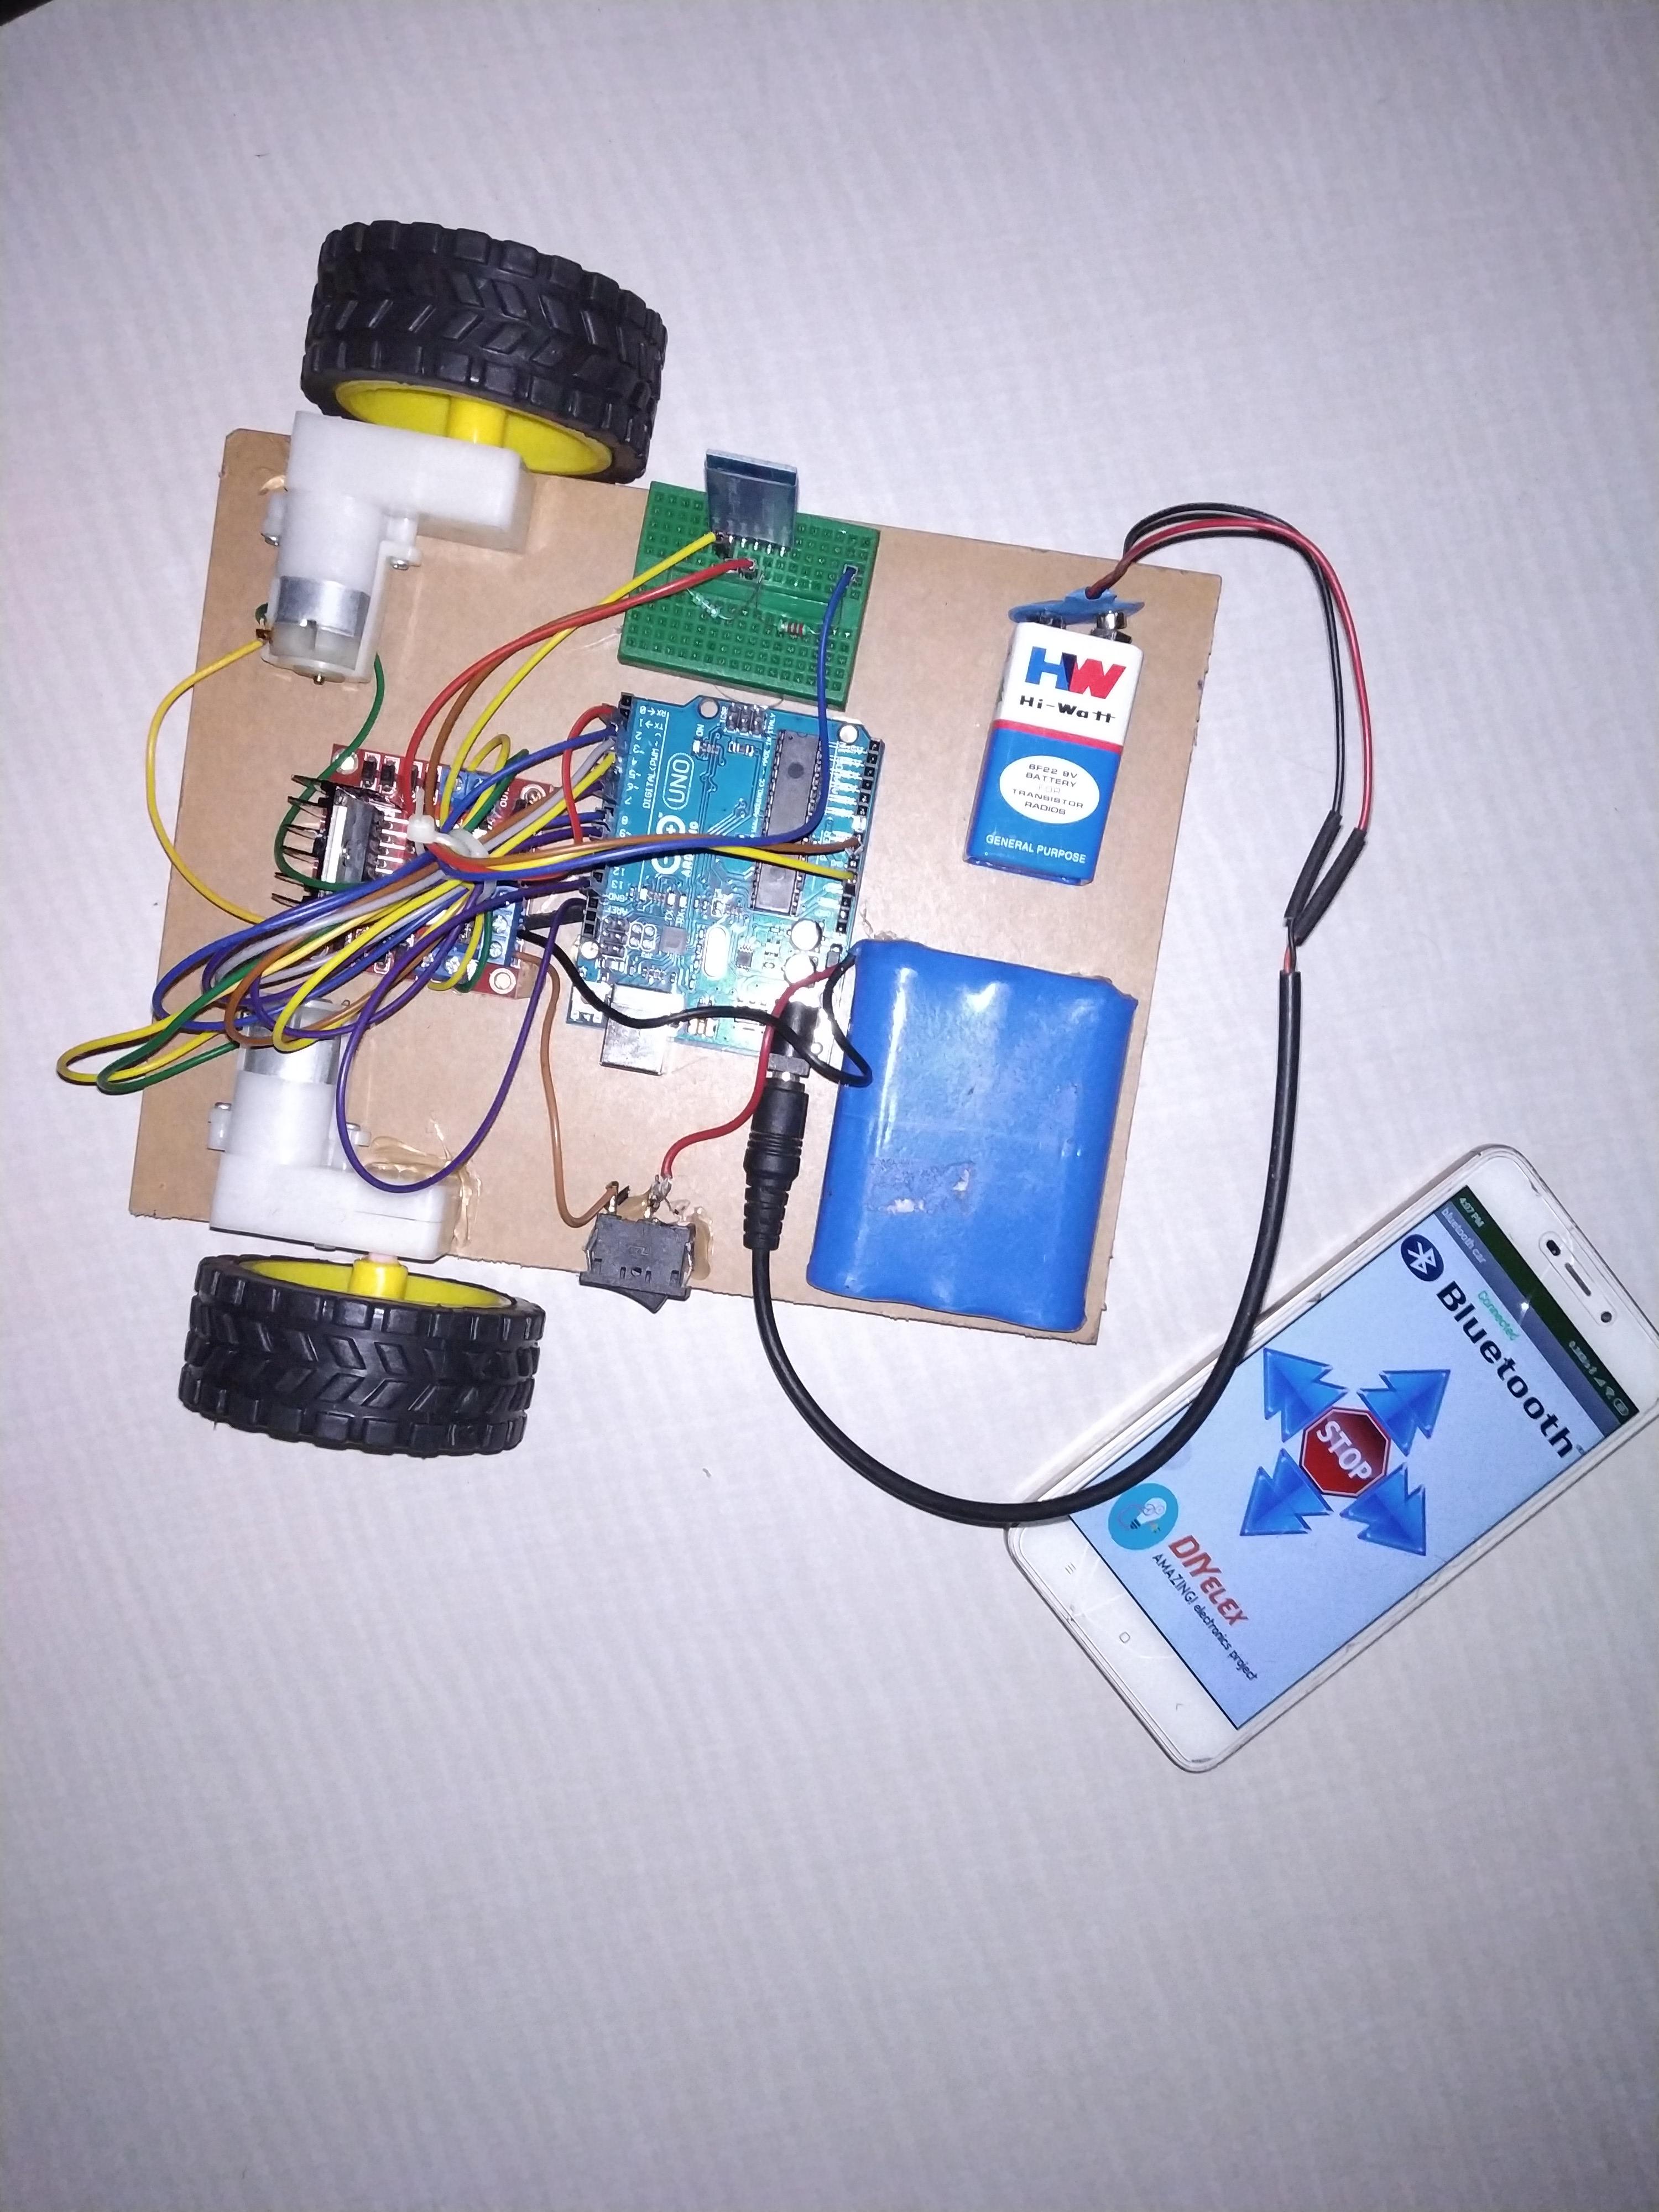 Bluetooth Controlled Car Using Arduino Electronic Projects Design